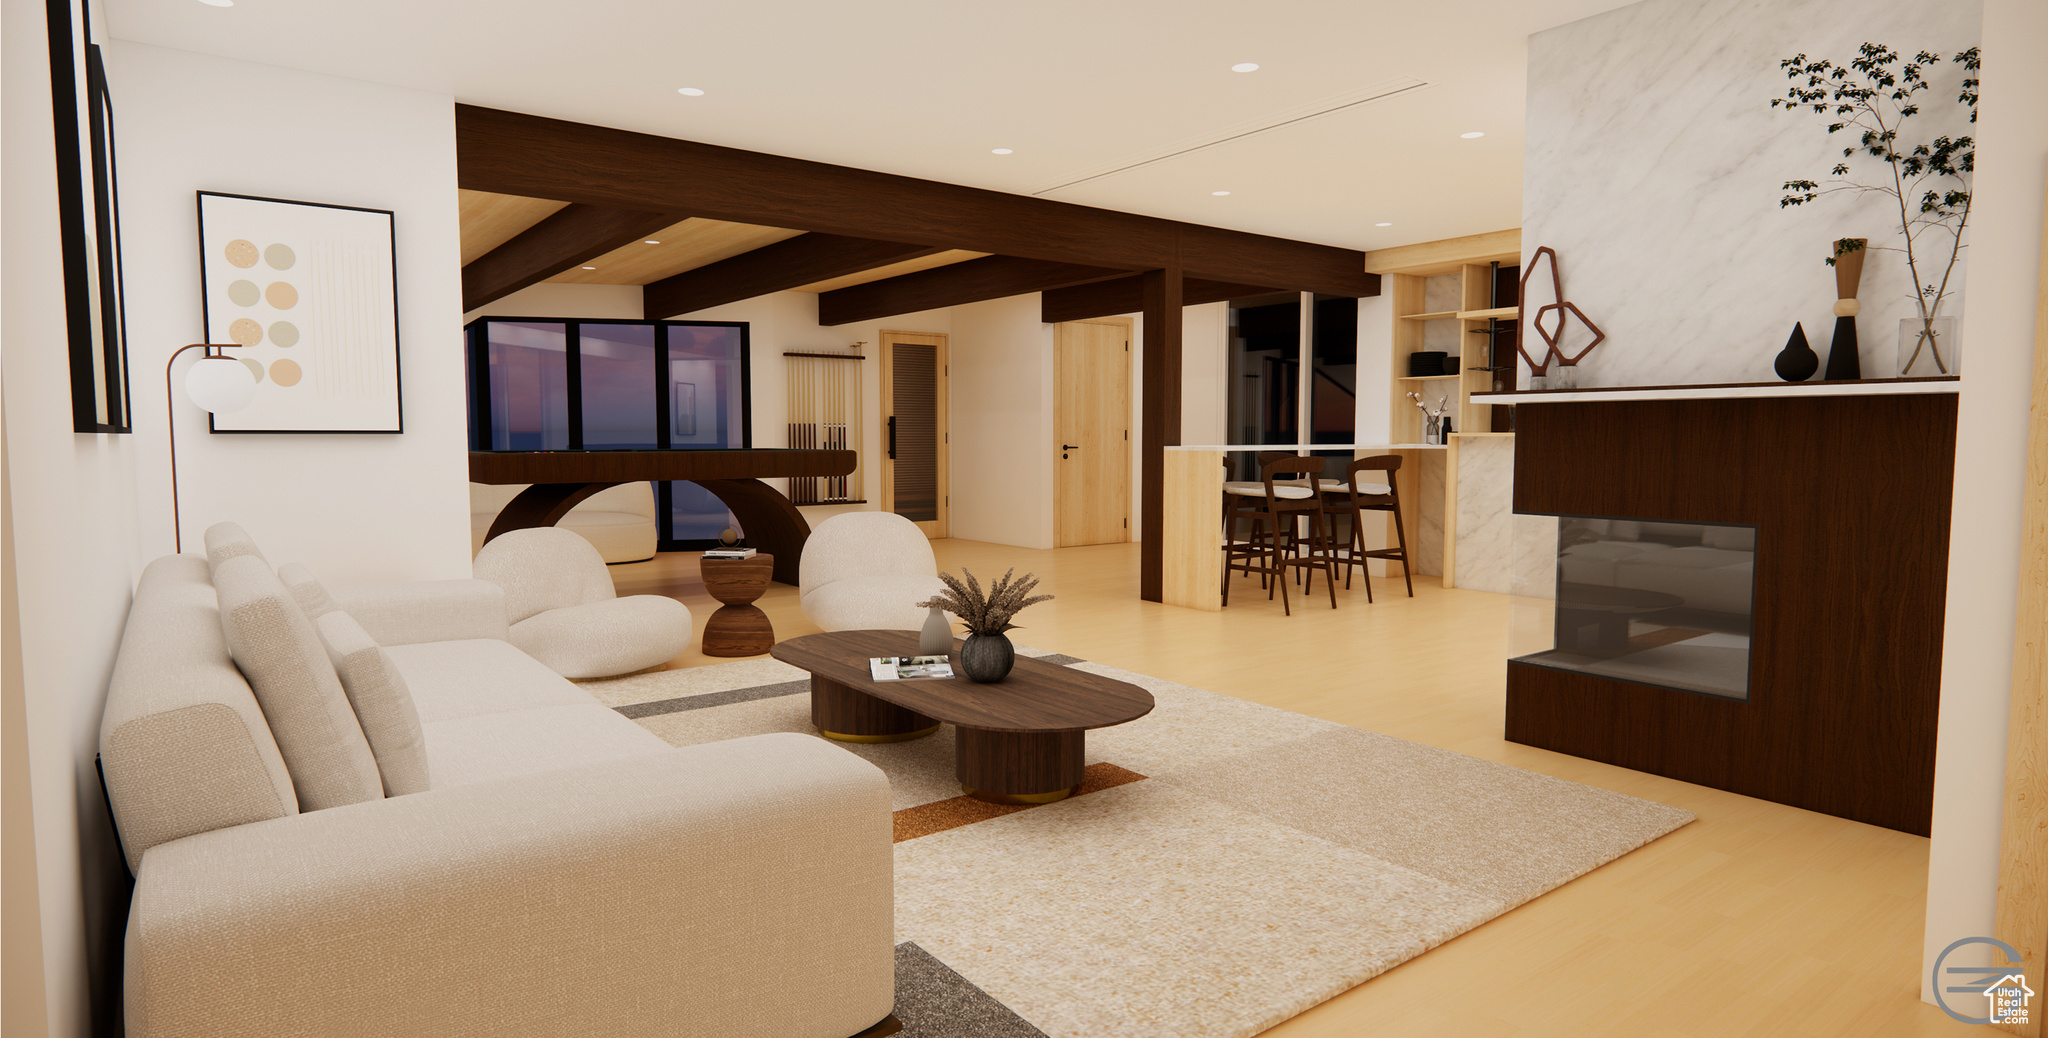 Living room featuring light hardwood / wood-style flooring and beamed ceiling - RENDERING